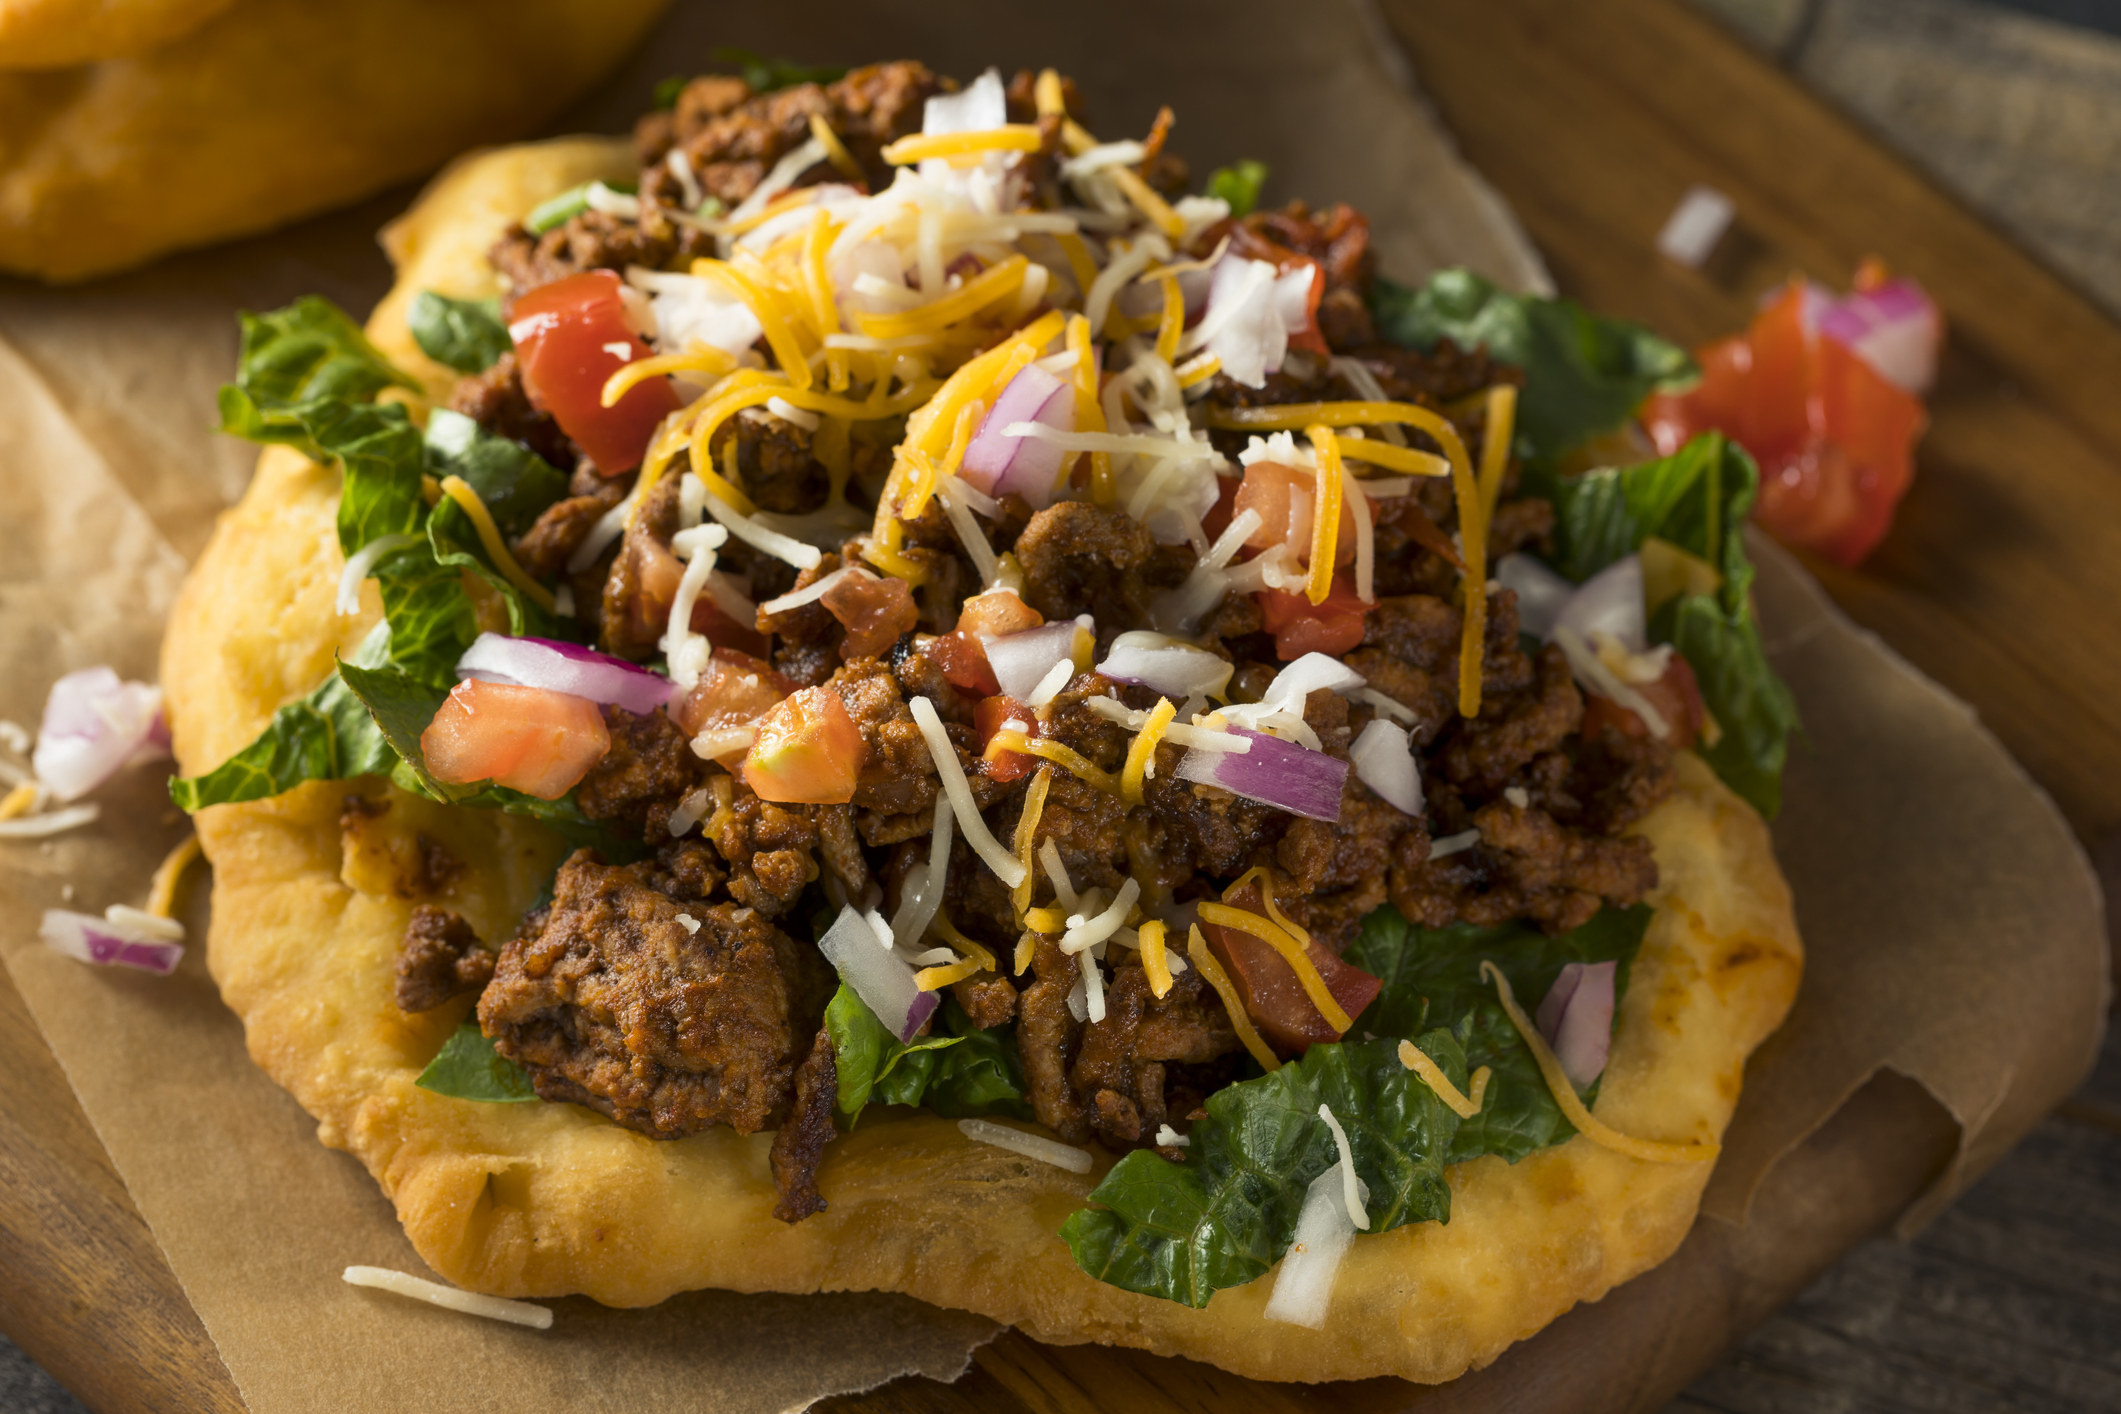 Native American fry bread with taco toppings.